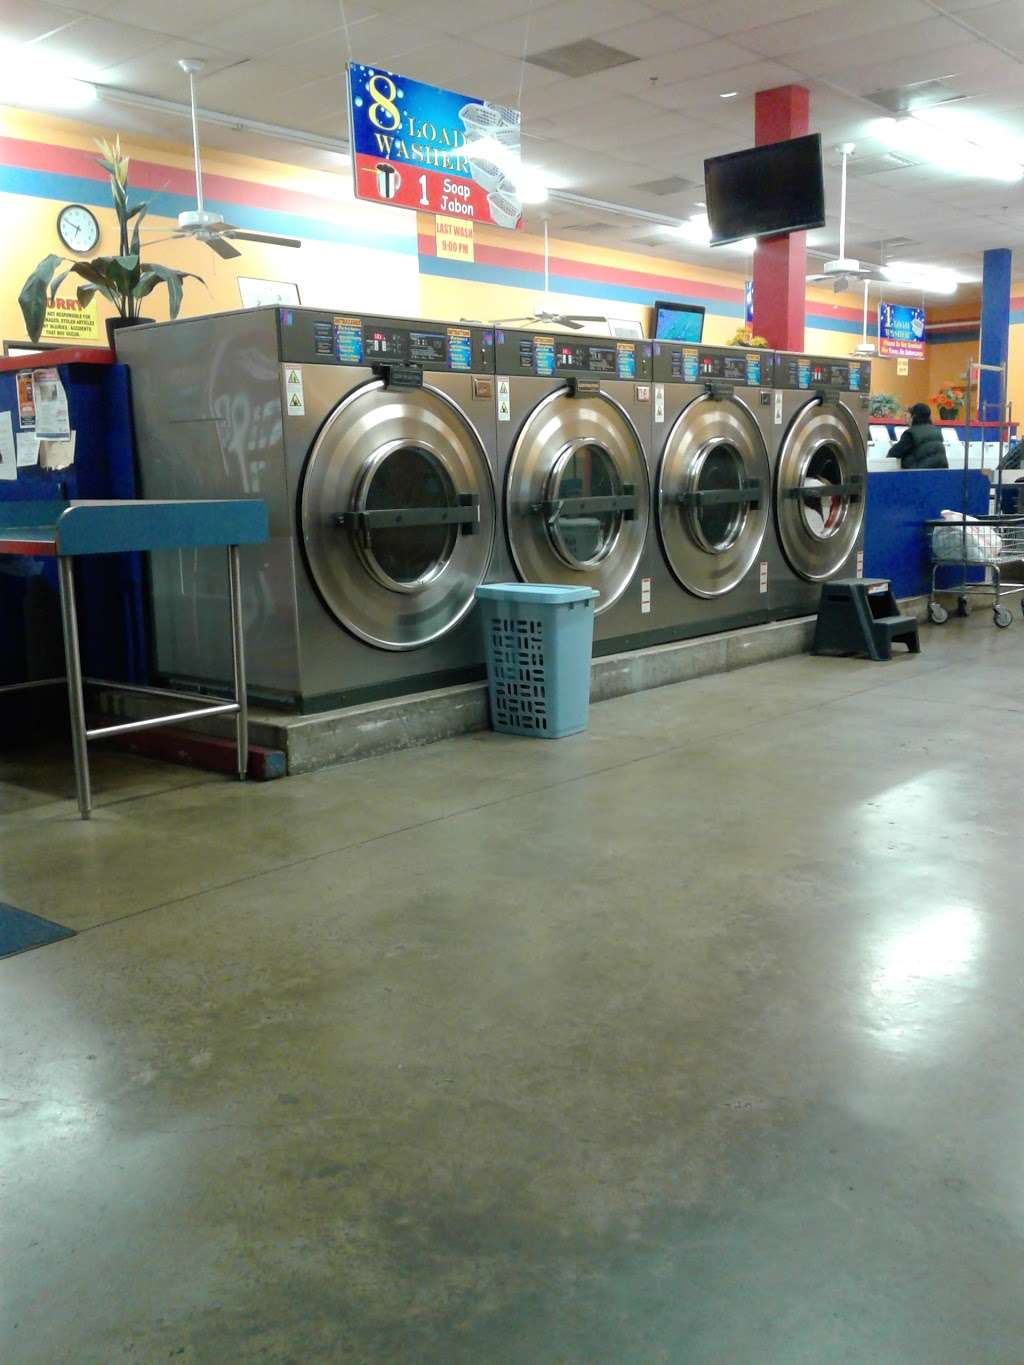 Wash 4 Less | 1955 S State Hwy 121, Lewisville, TX 75067, USA | Phone: (972) 315-6555